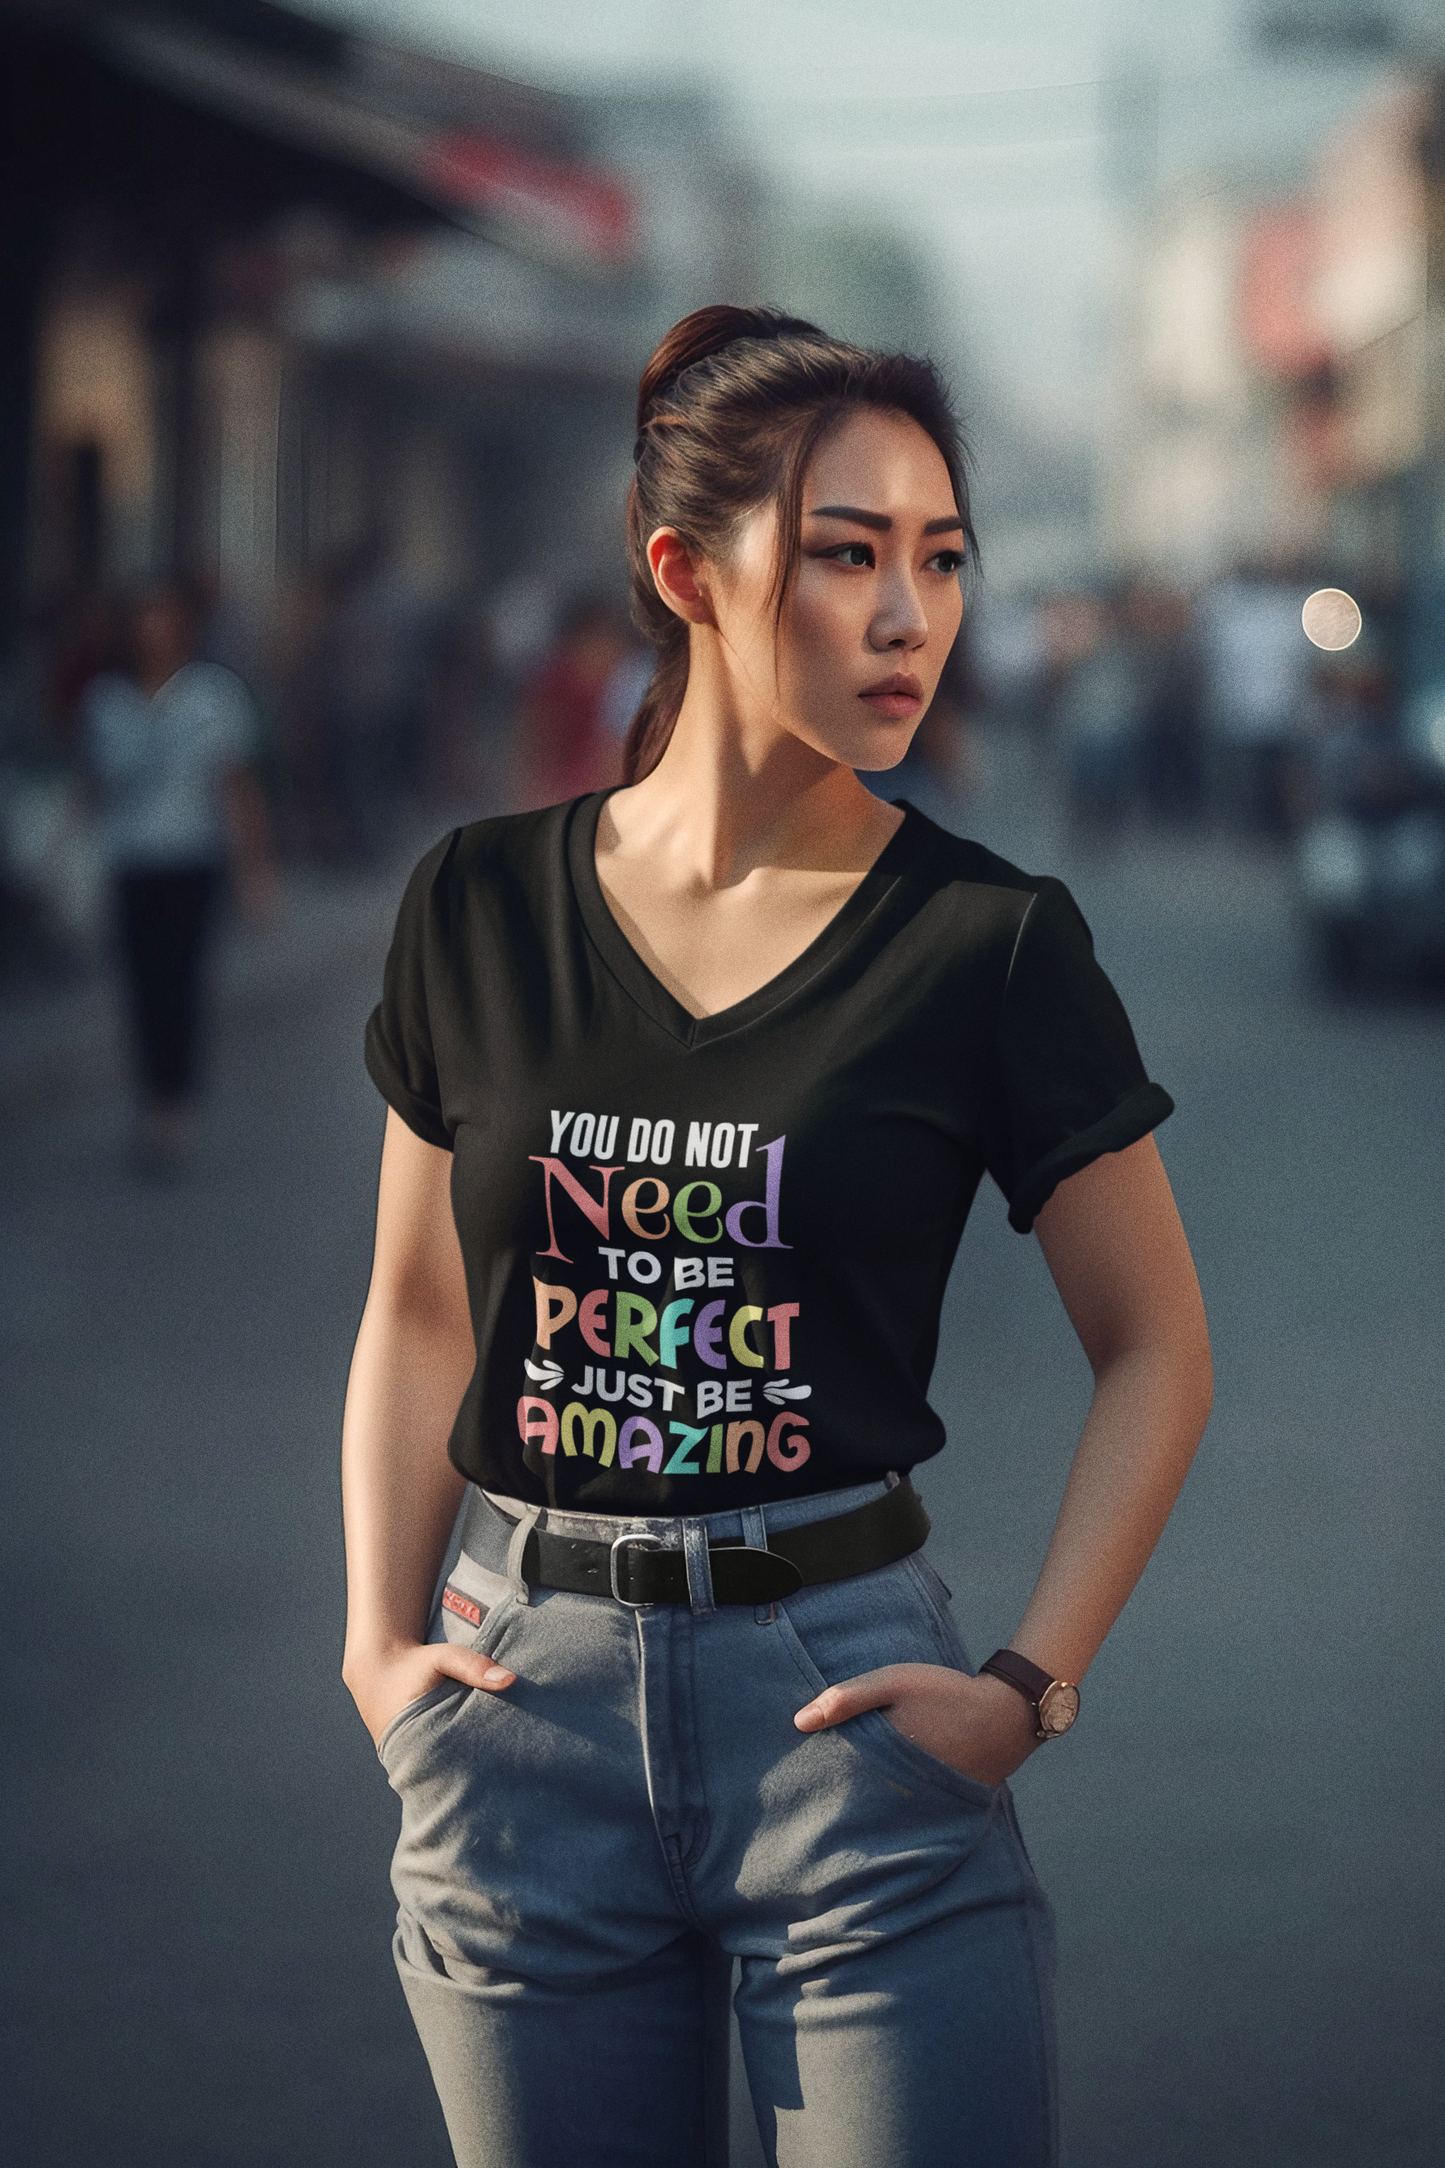 You Do Not Need To Be Perfect Just Be Amazing Women's V-Neck Tee, Amazing shirts, Inspirational shirts, Motivational Shirts, Trendy tees